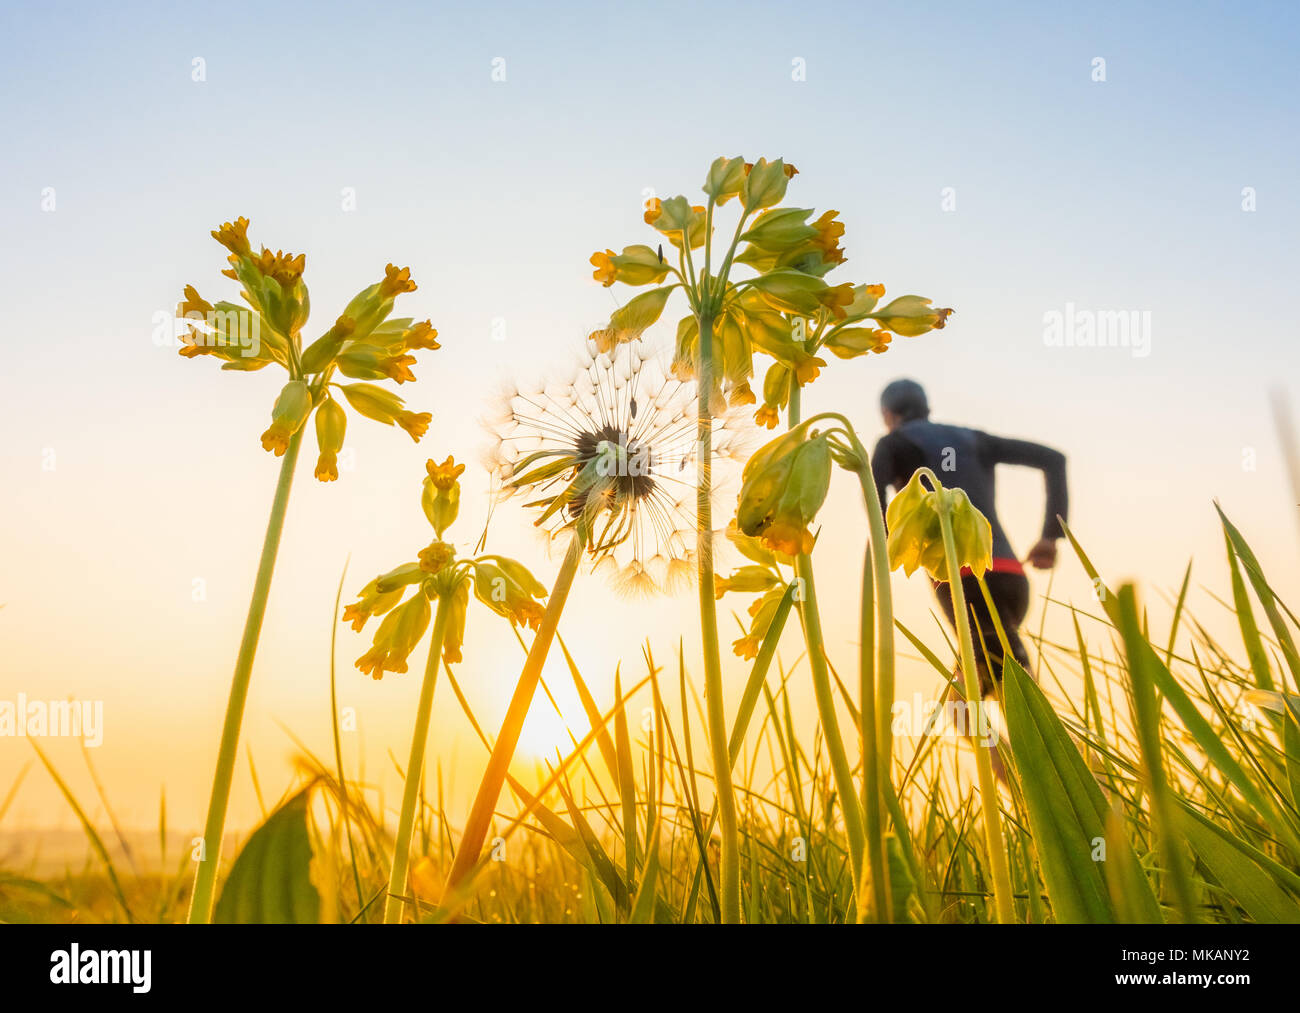 Billingham, north east  England, UK. 8th May, 2018. Weather: Jogger at sunrise in Billingham, north east England, on glorious back to work Tuesday. Following record breaking early May bank holiday temperatures, forecast is for cooler weather with some rain for the rest of the week  Stock Photo